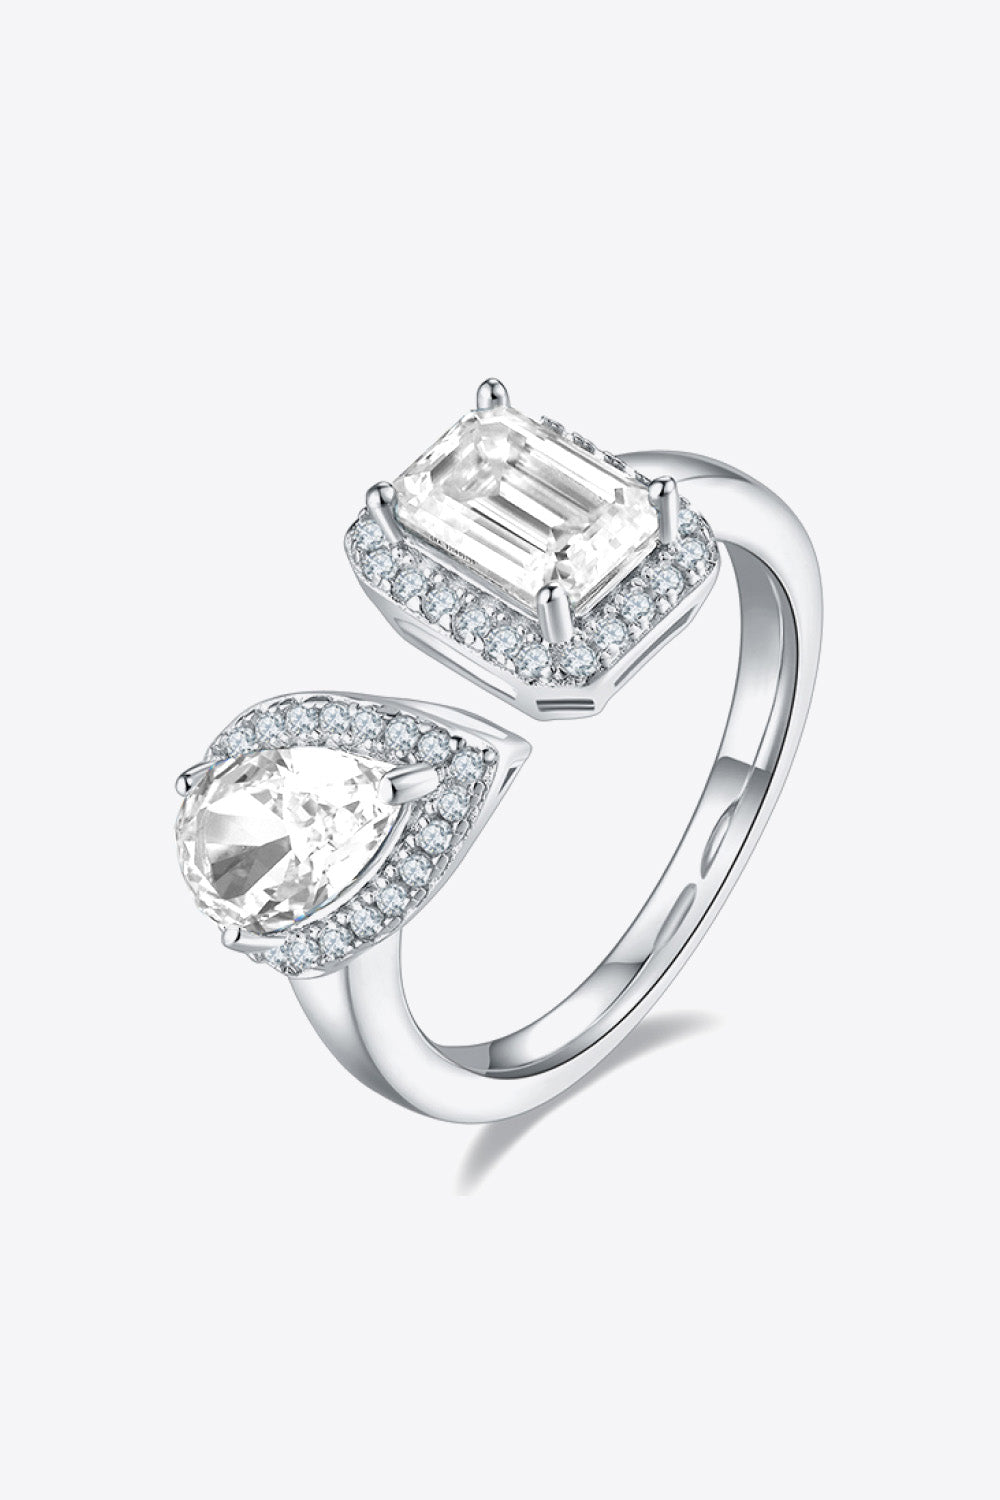 1 Carat Pear-Cut Emerald-Cut Moissanite Platinum Over Pure Sterling Silver Open Ring - Sparkala